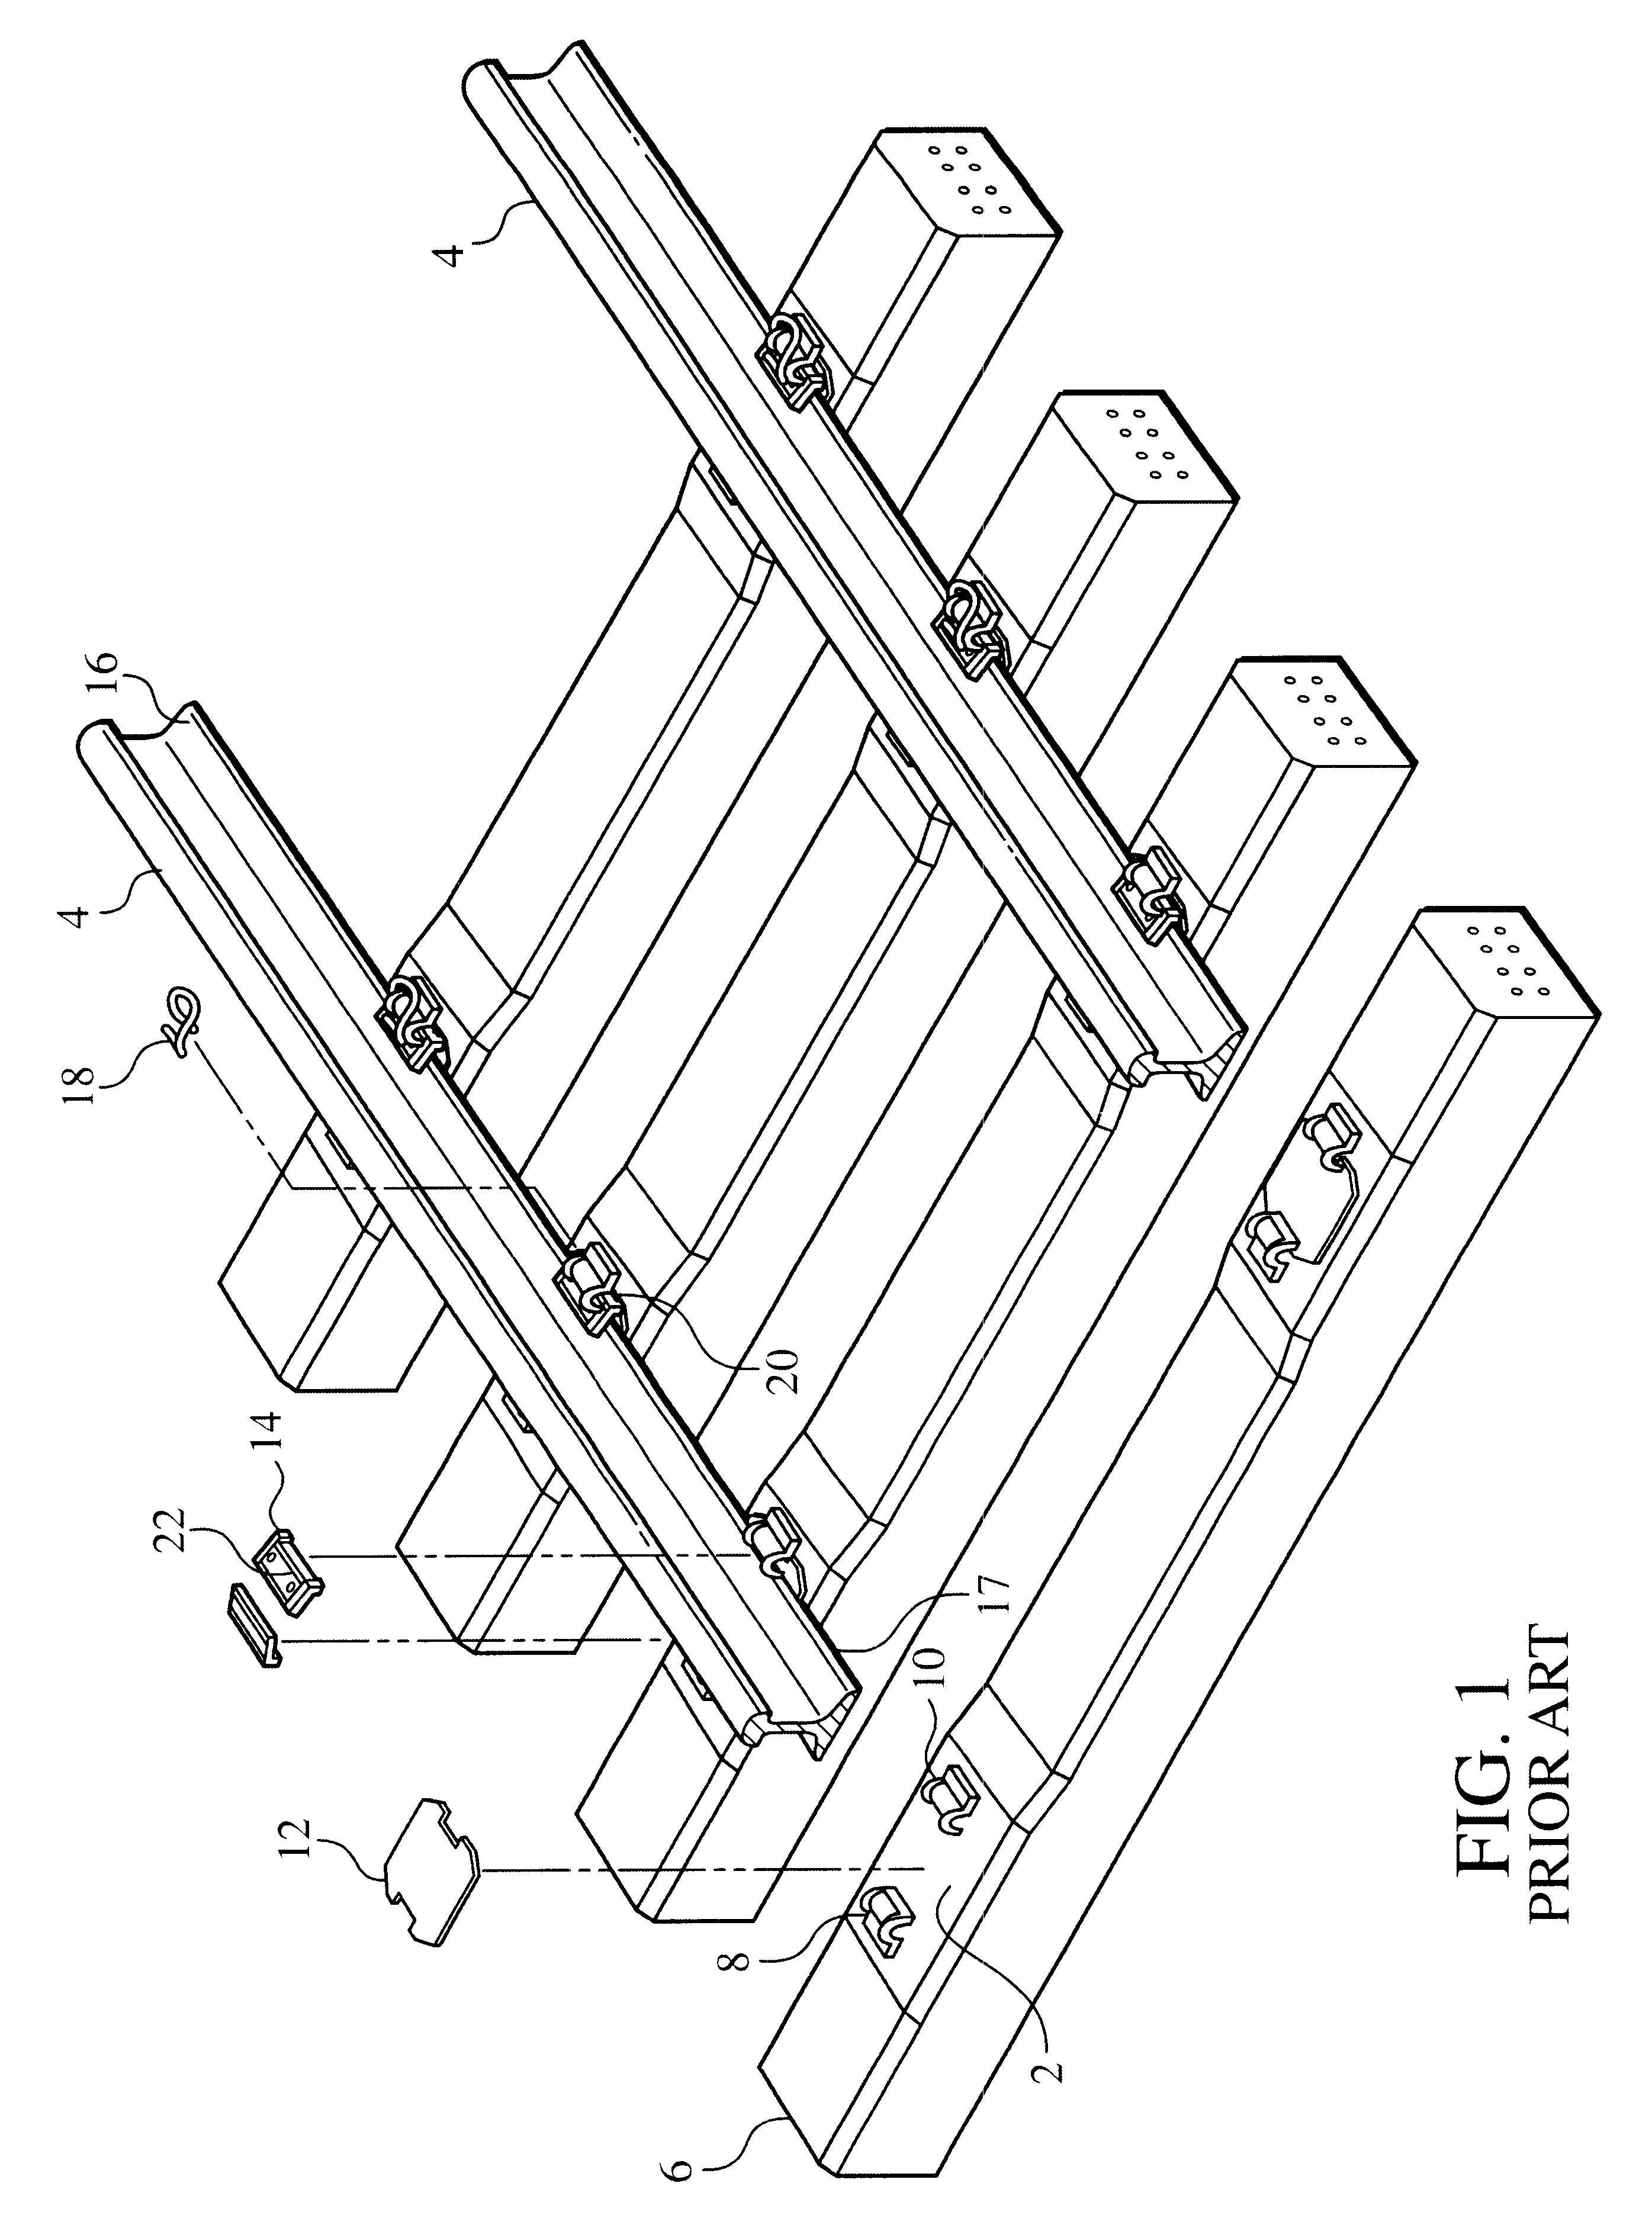 Concrete railroad tie two-piece insulator spacer and fastening system